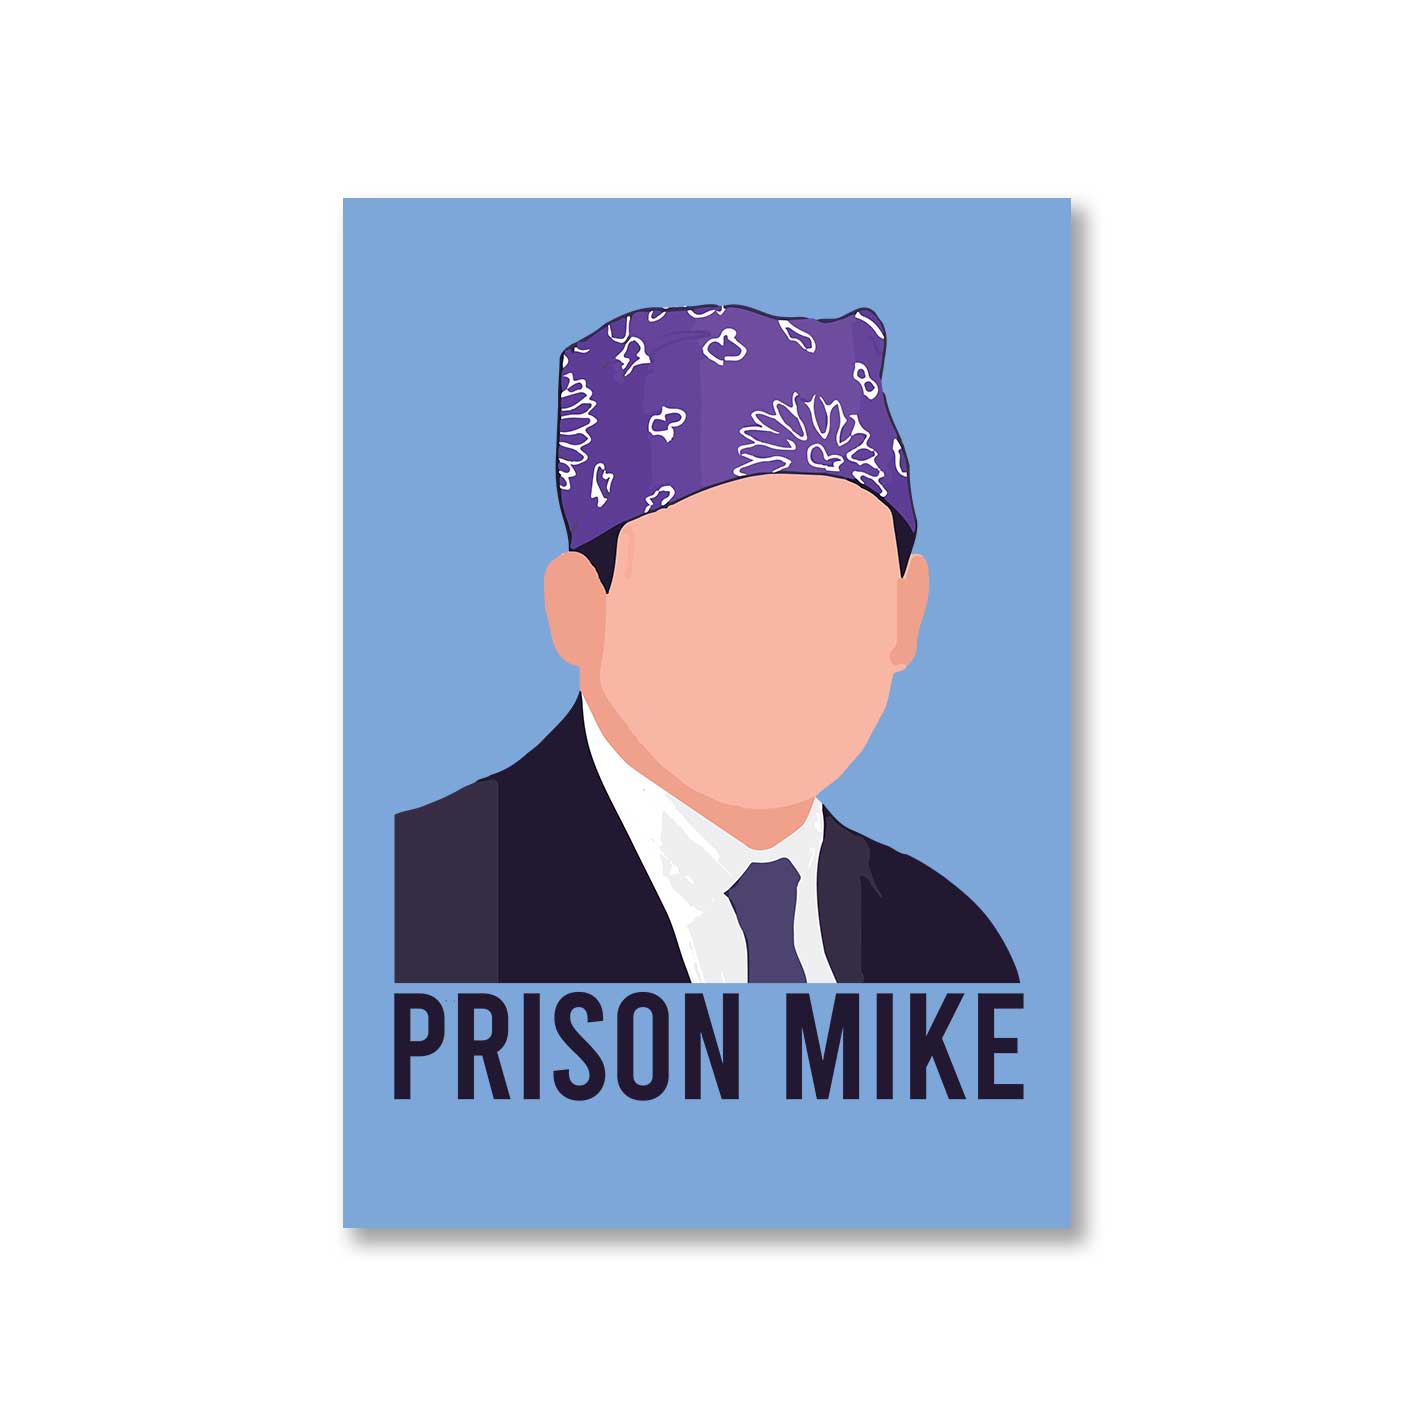 the office prison mike poster wall art buy online united states of america usa the banyan tee tbt a4 - michael scott